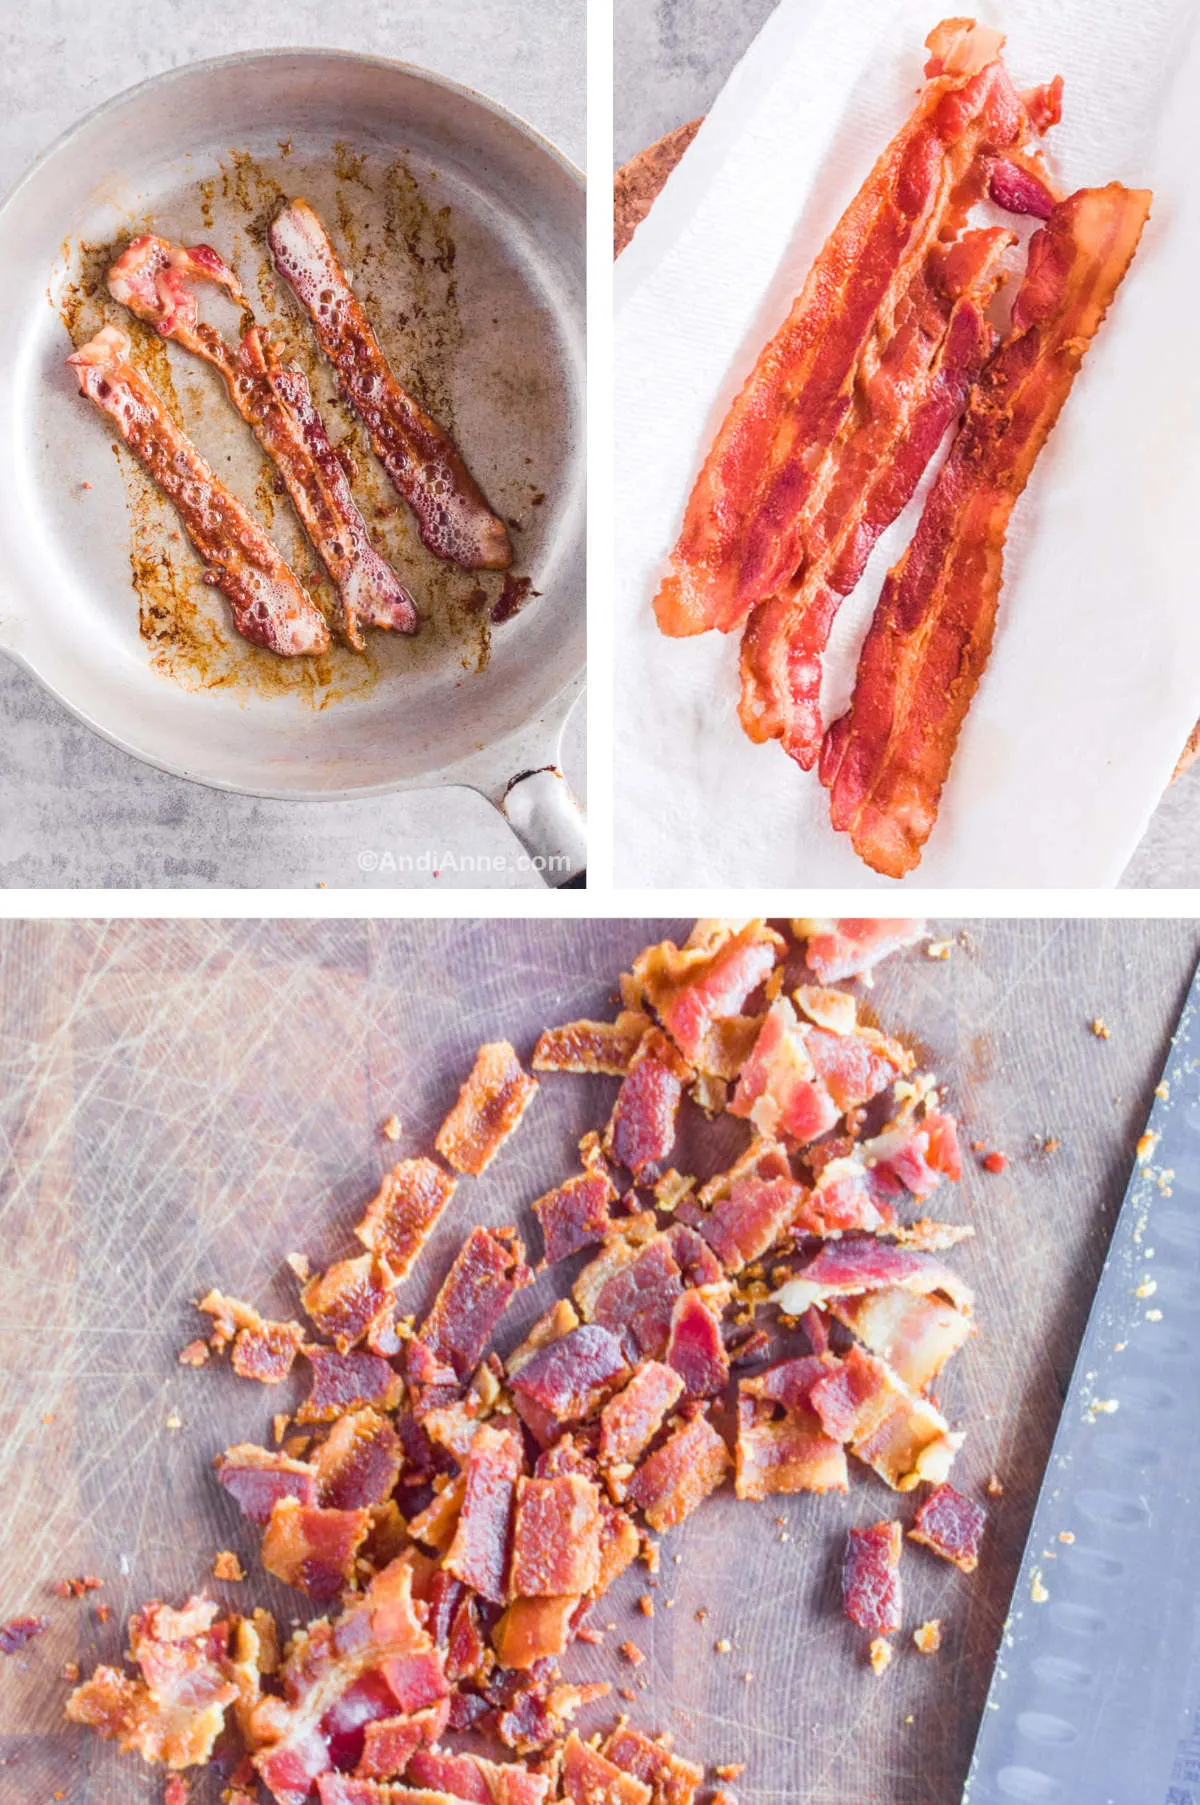 Three overhead images in one: 1. Bacon frying in a pan. 2. Bacon drying on paper towel. 3. Bacon chopped into small pieces with a chef's knife. 